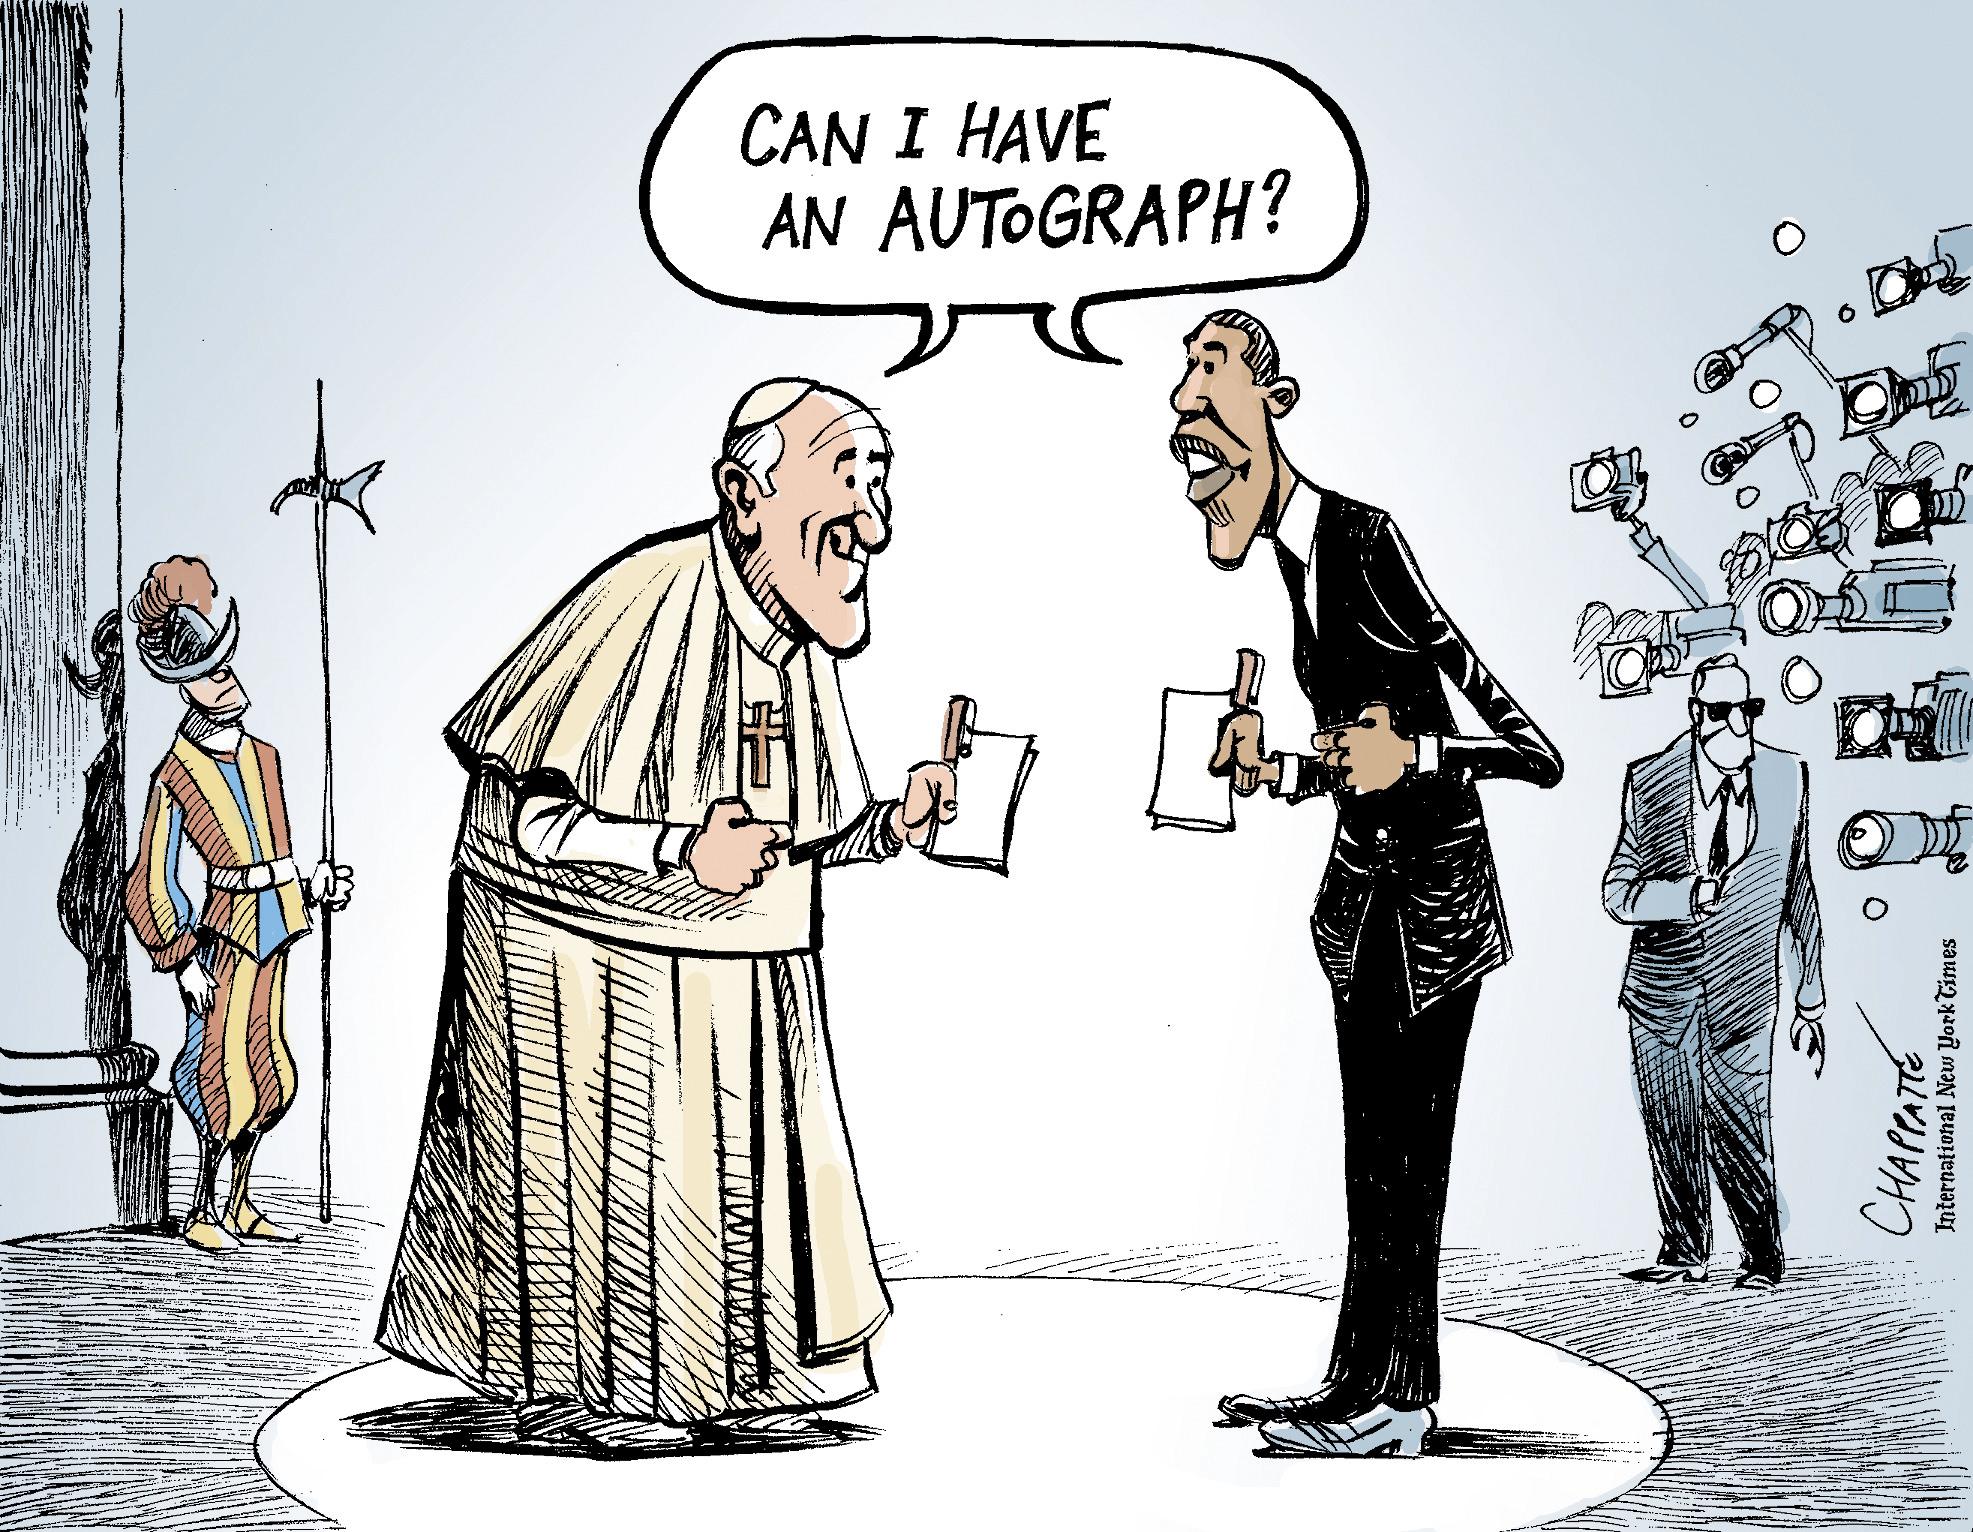 Obama meets Pope Francis